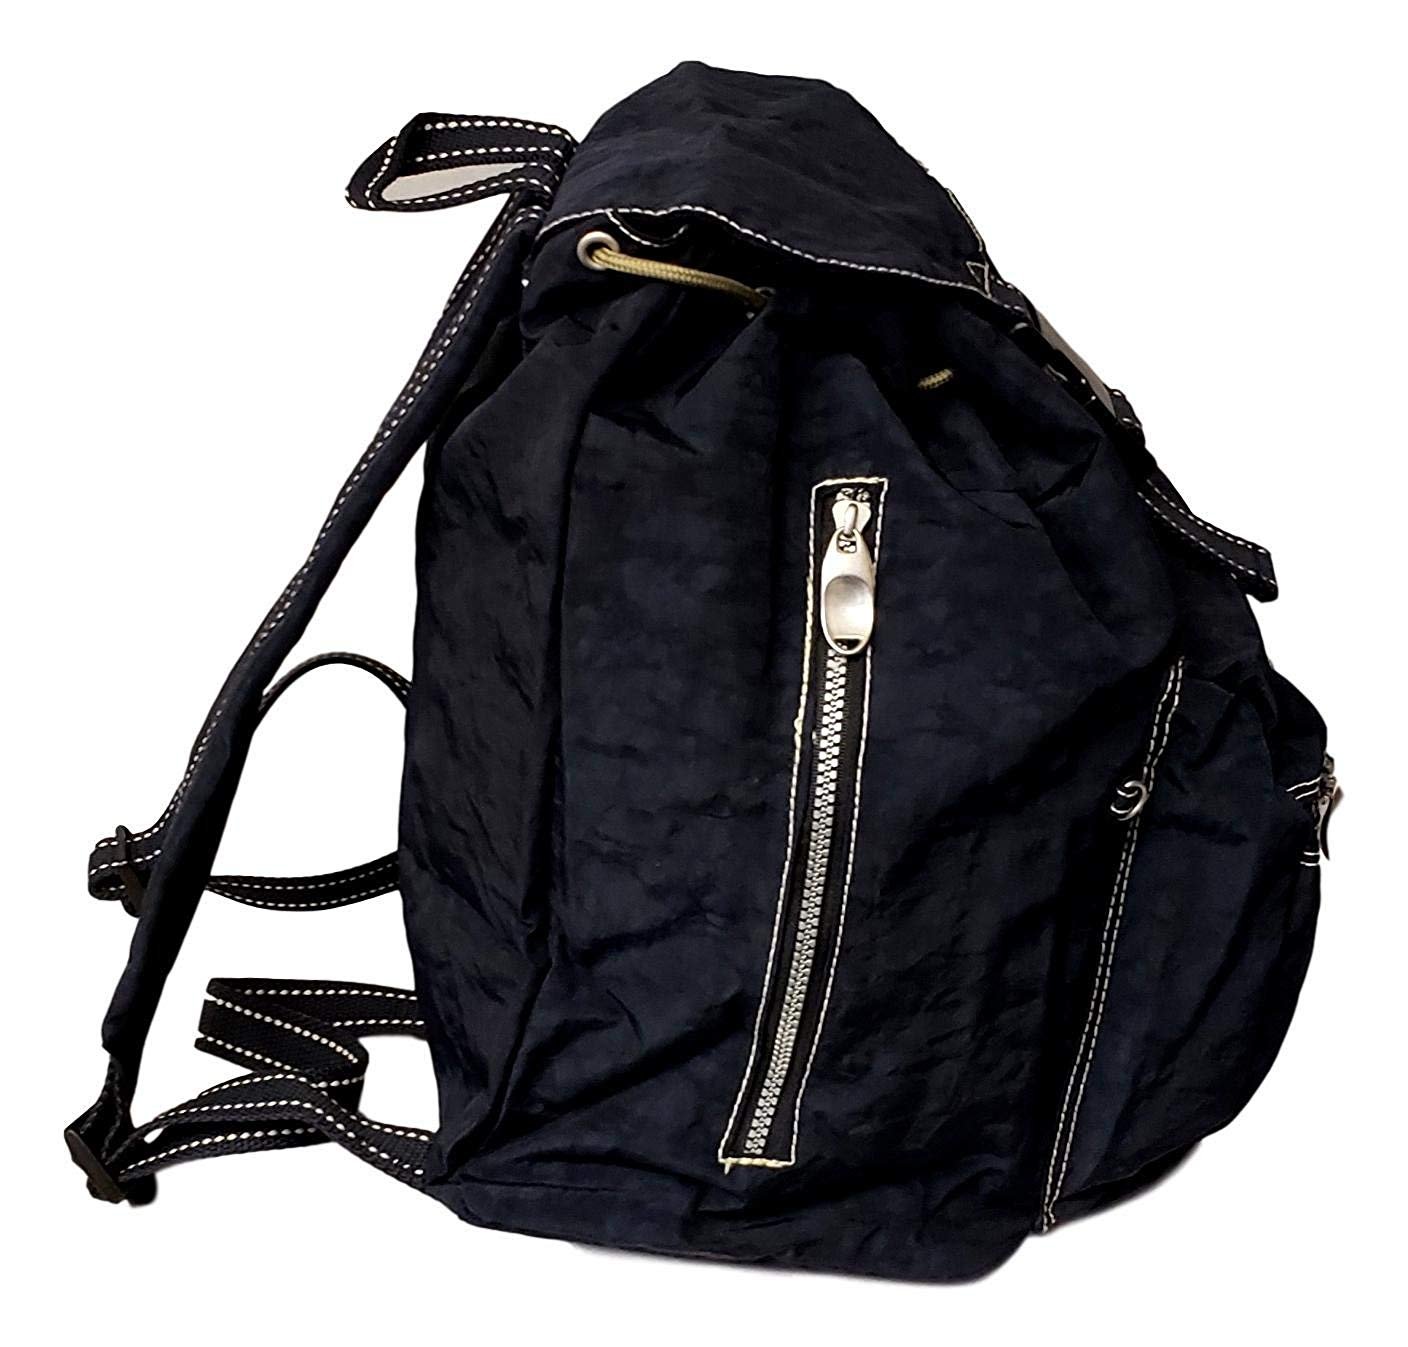 Lightweight Drawstring Flap Over Campus Backpack Blue - image 4 of 4